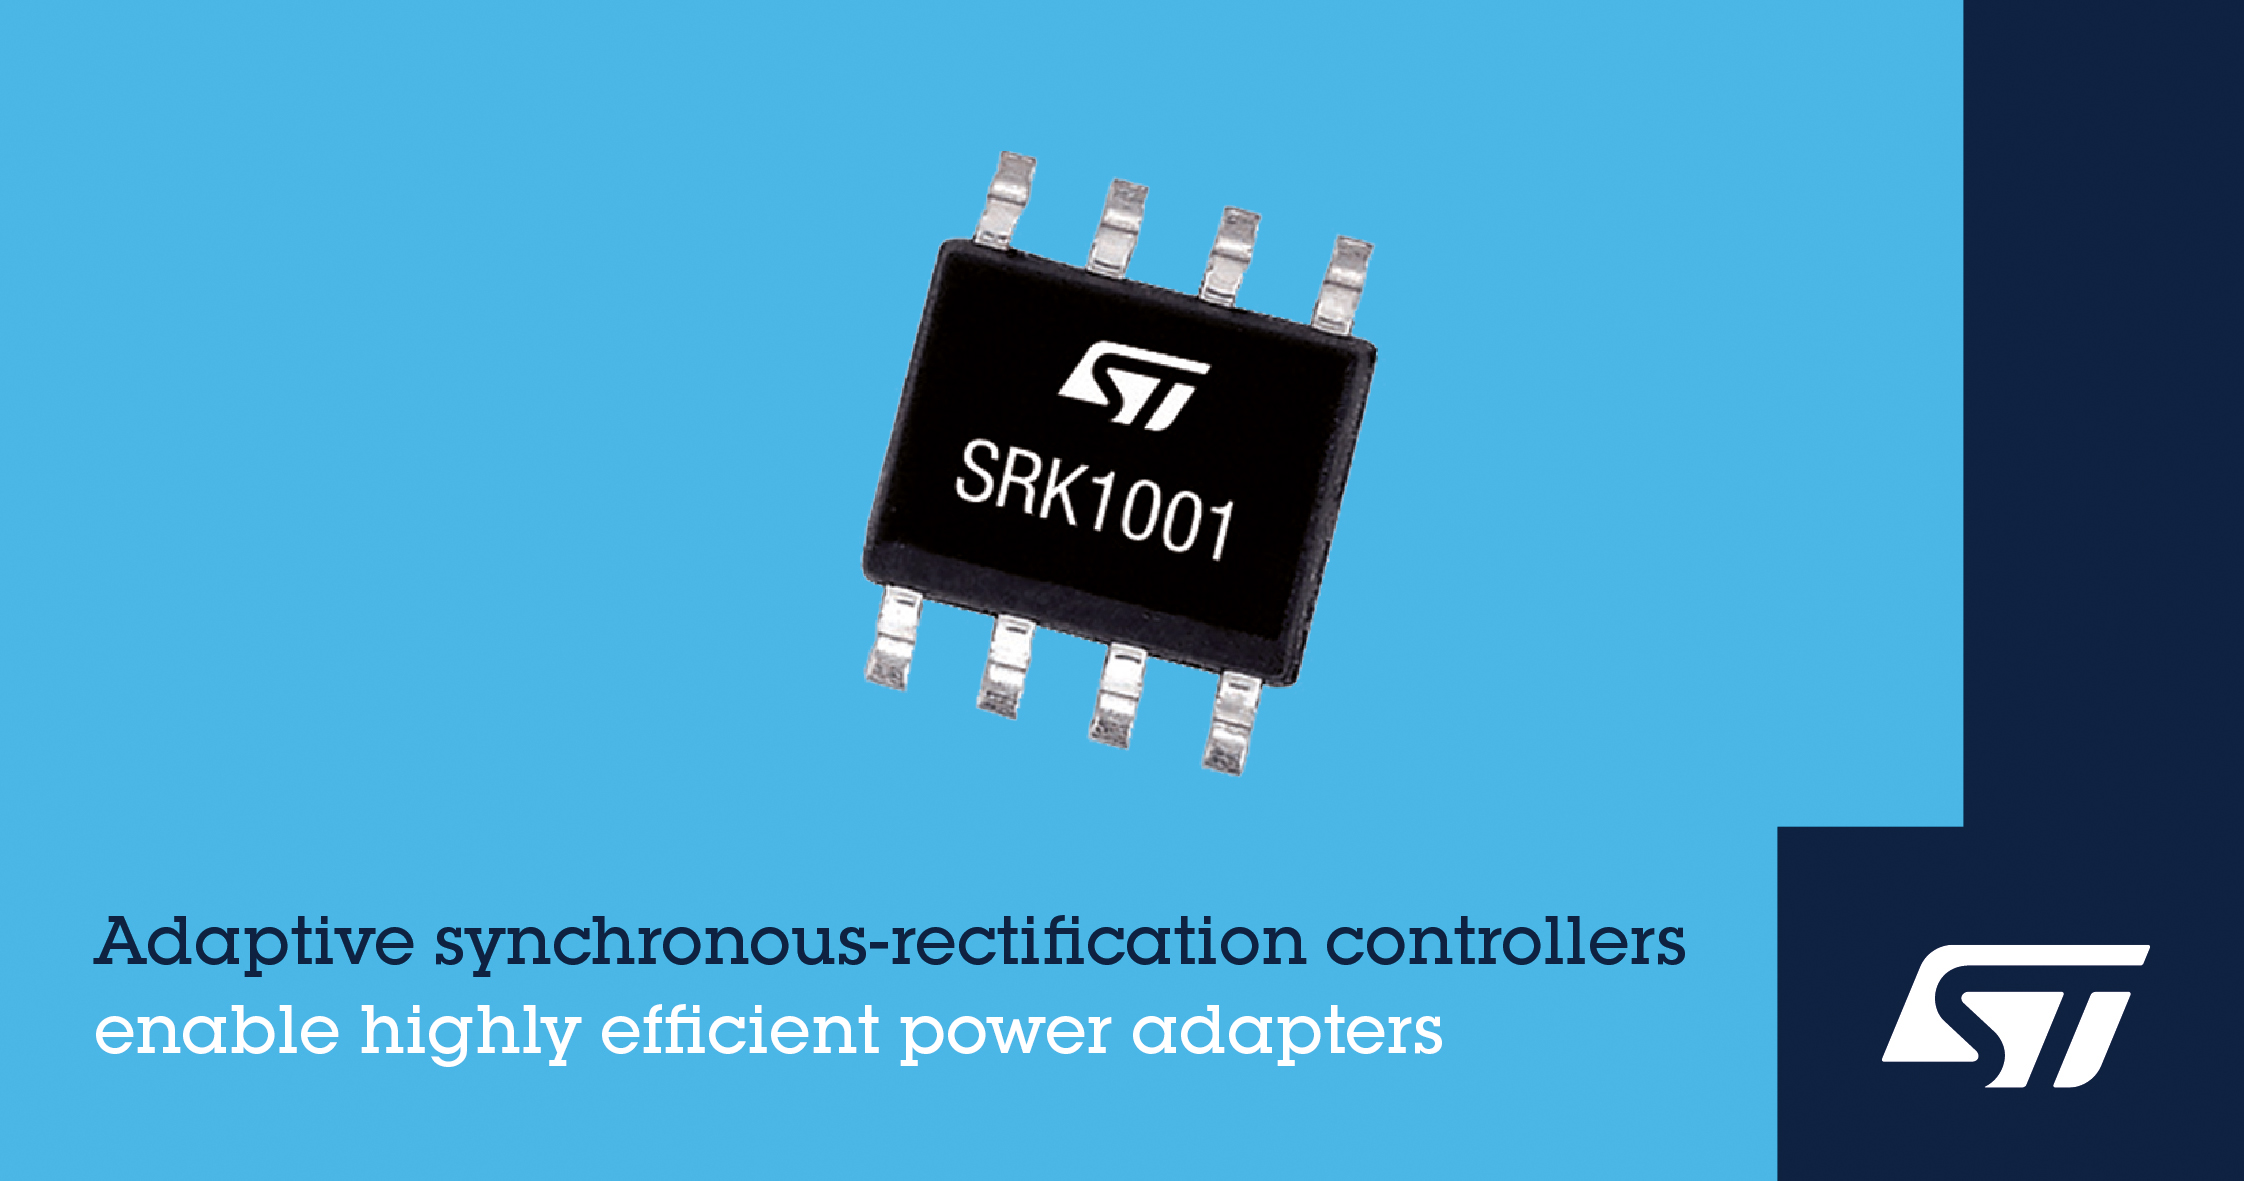 STMicroelectronics Reveals Innovative Synchronous-Rectification Controller for Affordable, High-Efficiency Power Adapters